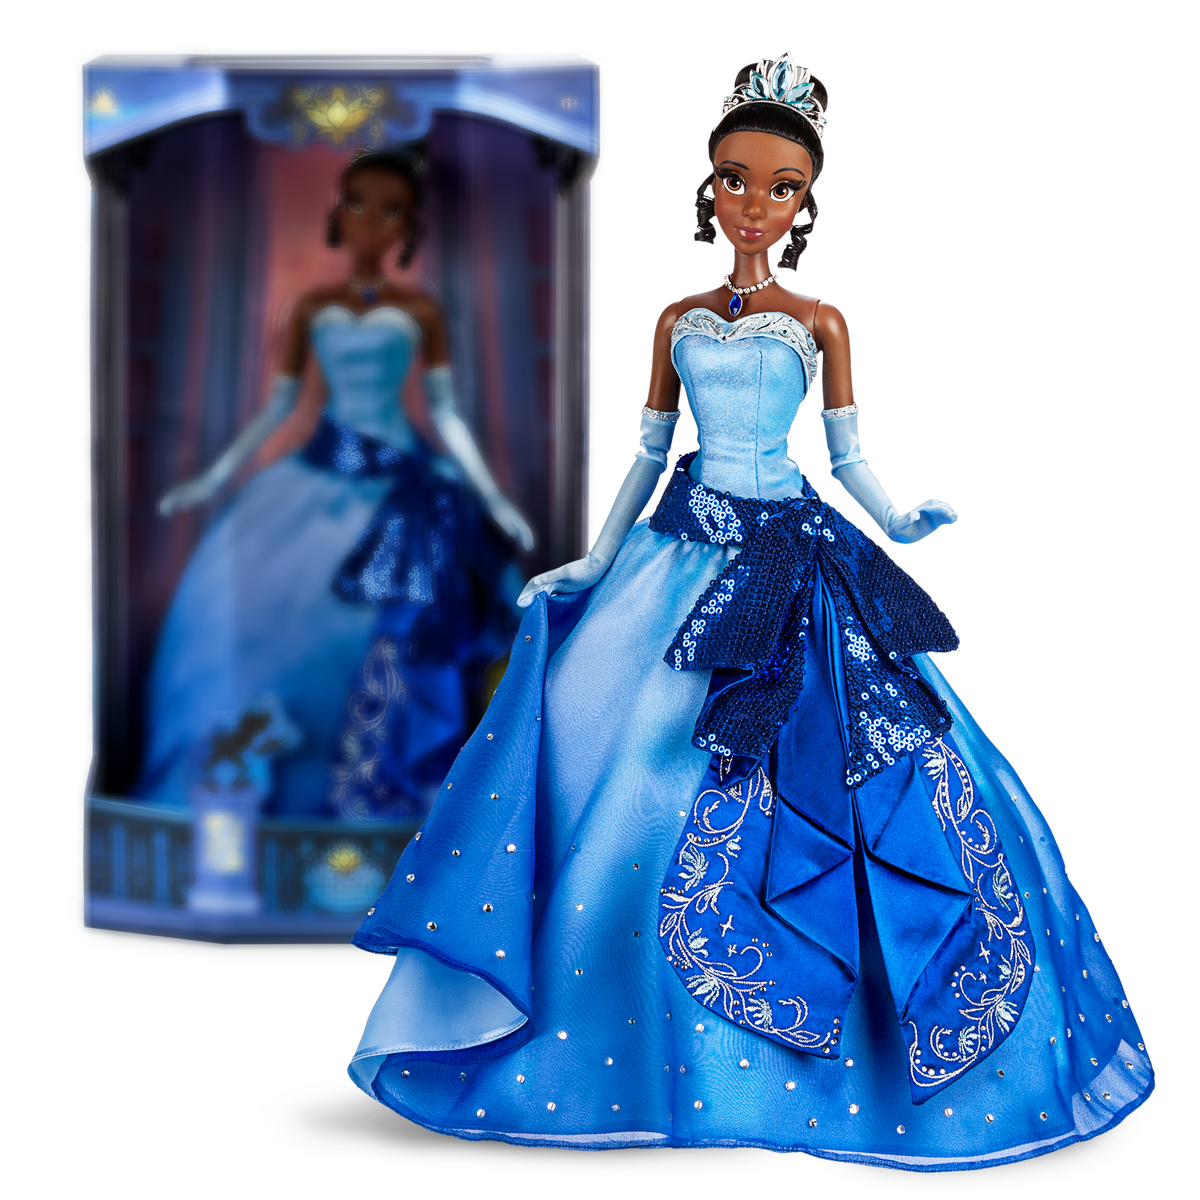 https://static.wikia.nocookie.net/disneydolls/images/9/9b/Tiana10thAnniversaryDoll1.png/revision/latest/scale-to-width-down/1200?cb=20211111002224